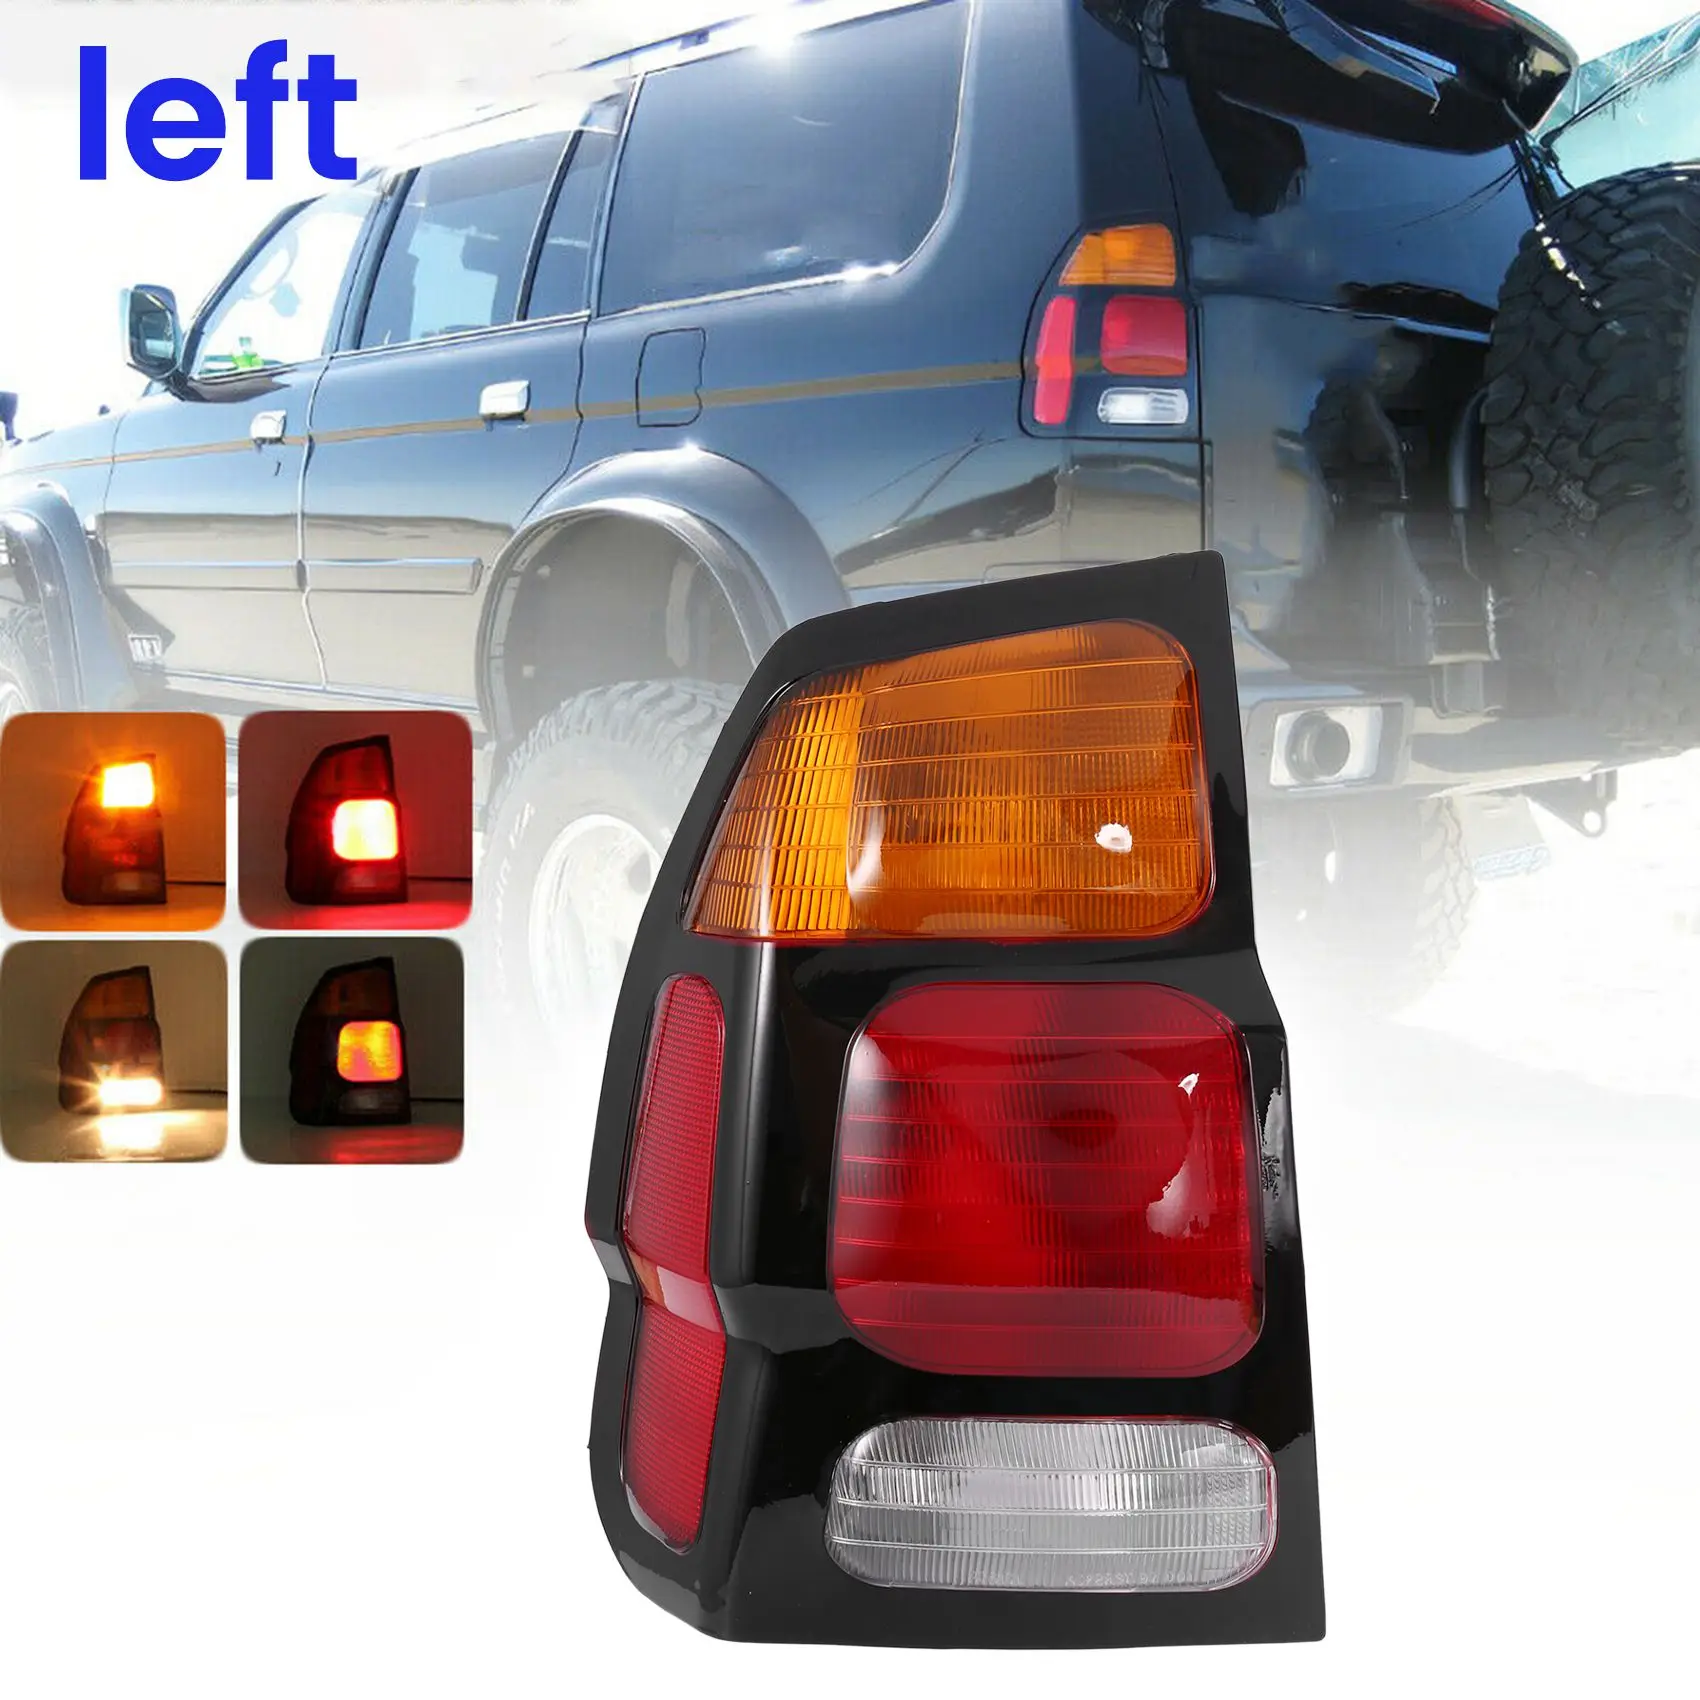 

Left Side Car Rear Tail Brake Lights for Mitsubishi Pajero MONTERO Sport 1999-2008 Warning Lamp Taillight Assembly